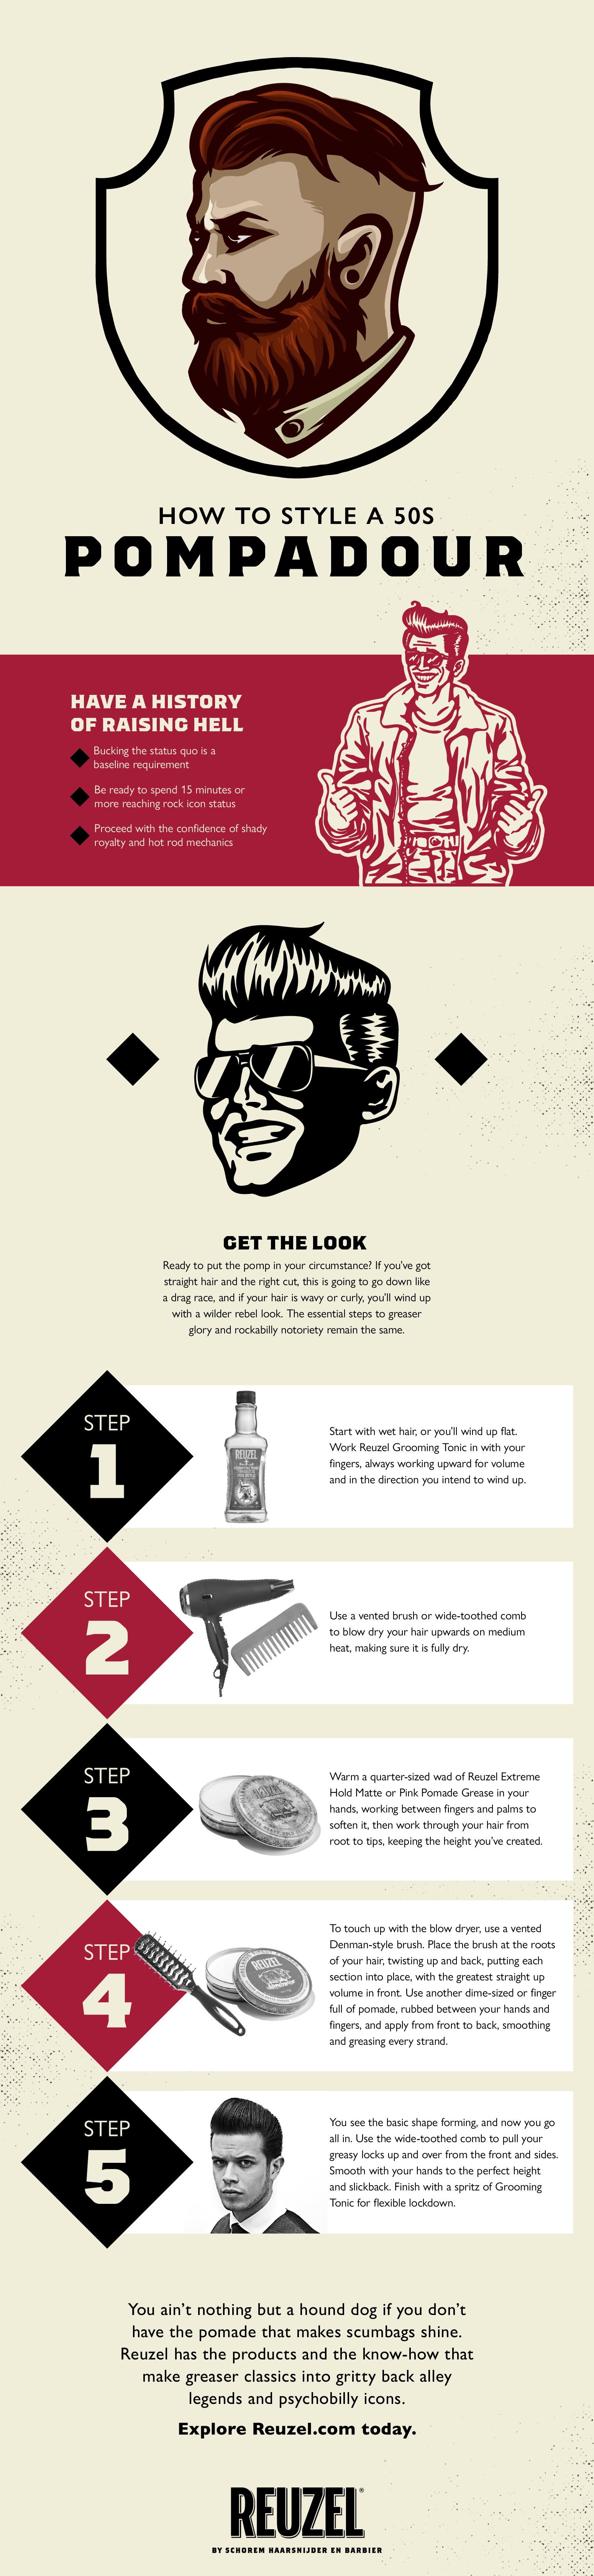 How to Style a 50s Pompadour Infographic